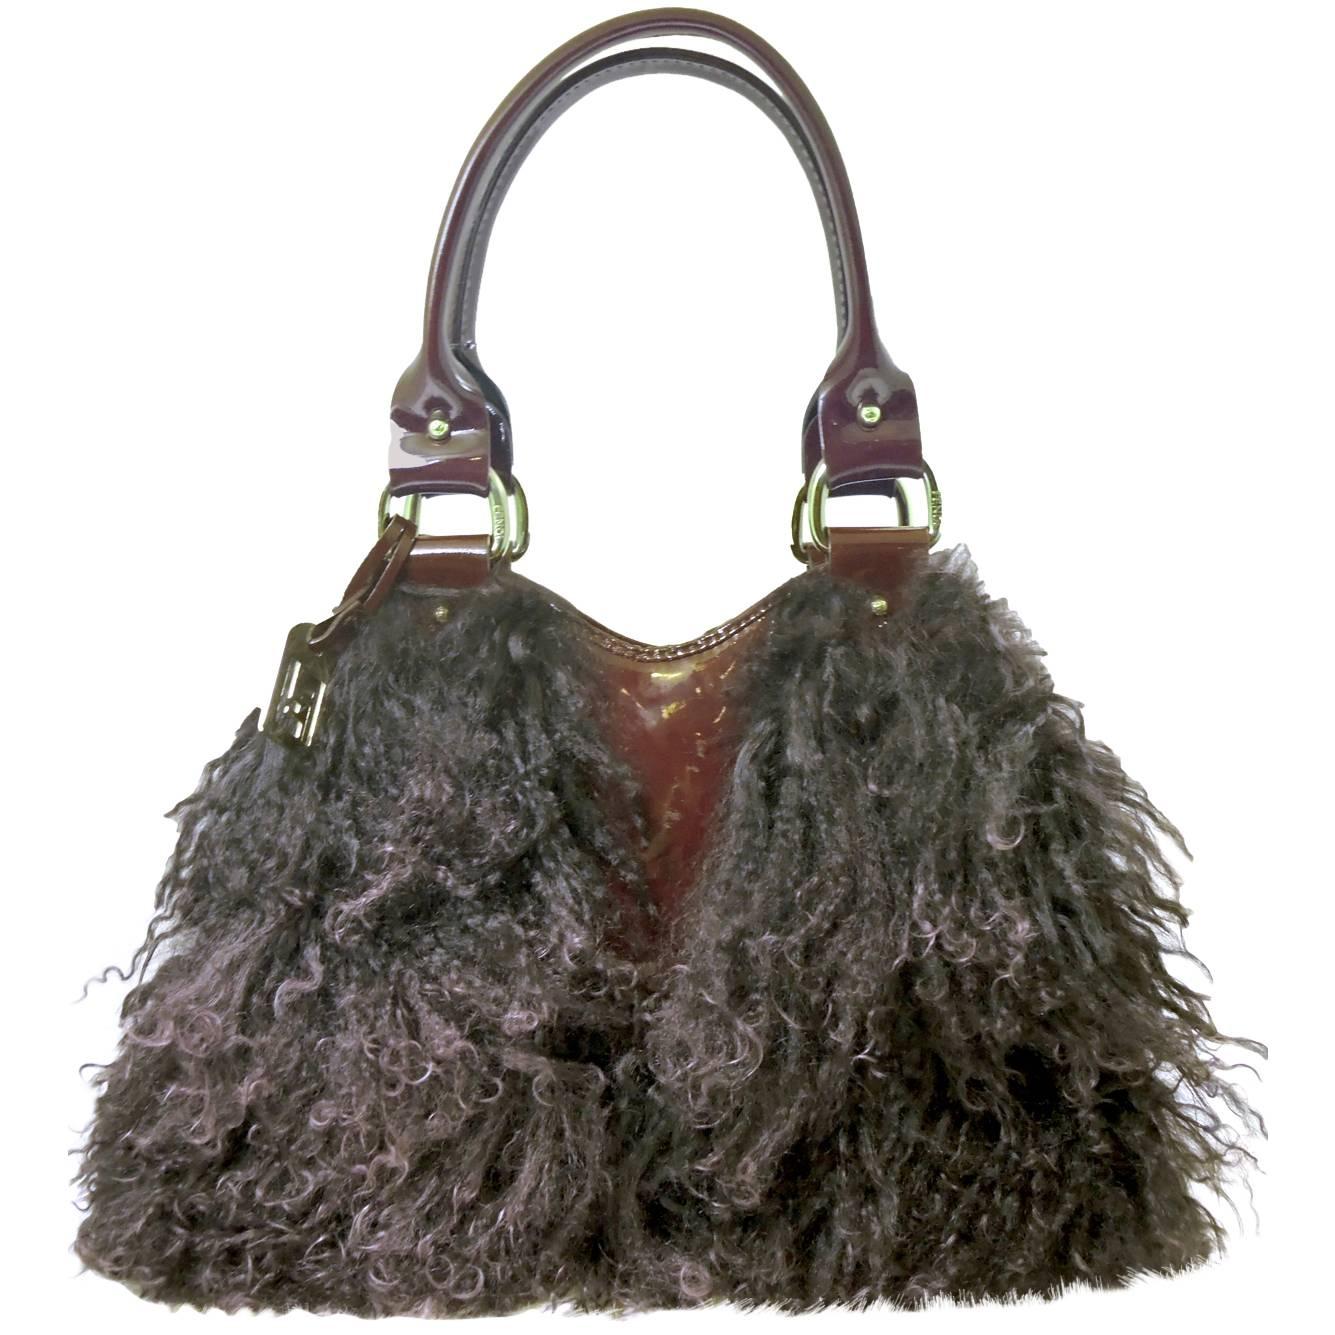 Vintage Fendi Couture Lambs Wool Burgundy Patent Leather Bag 